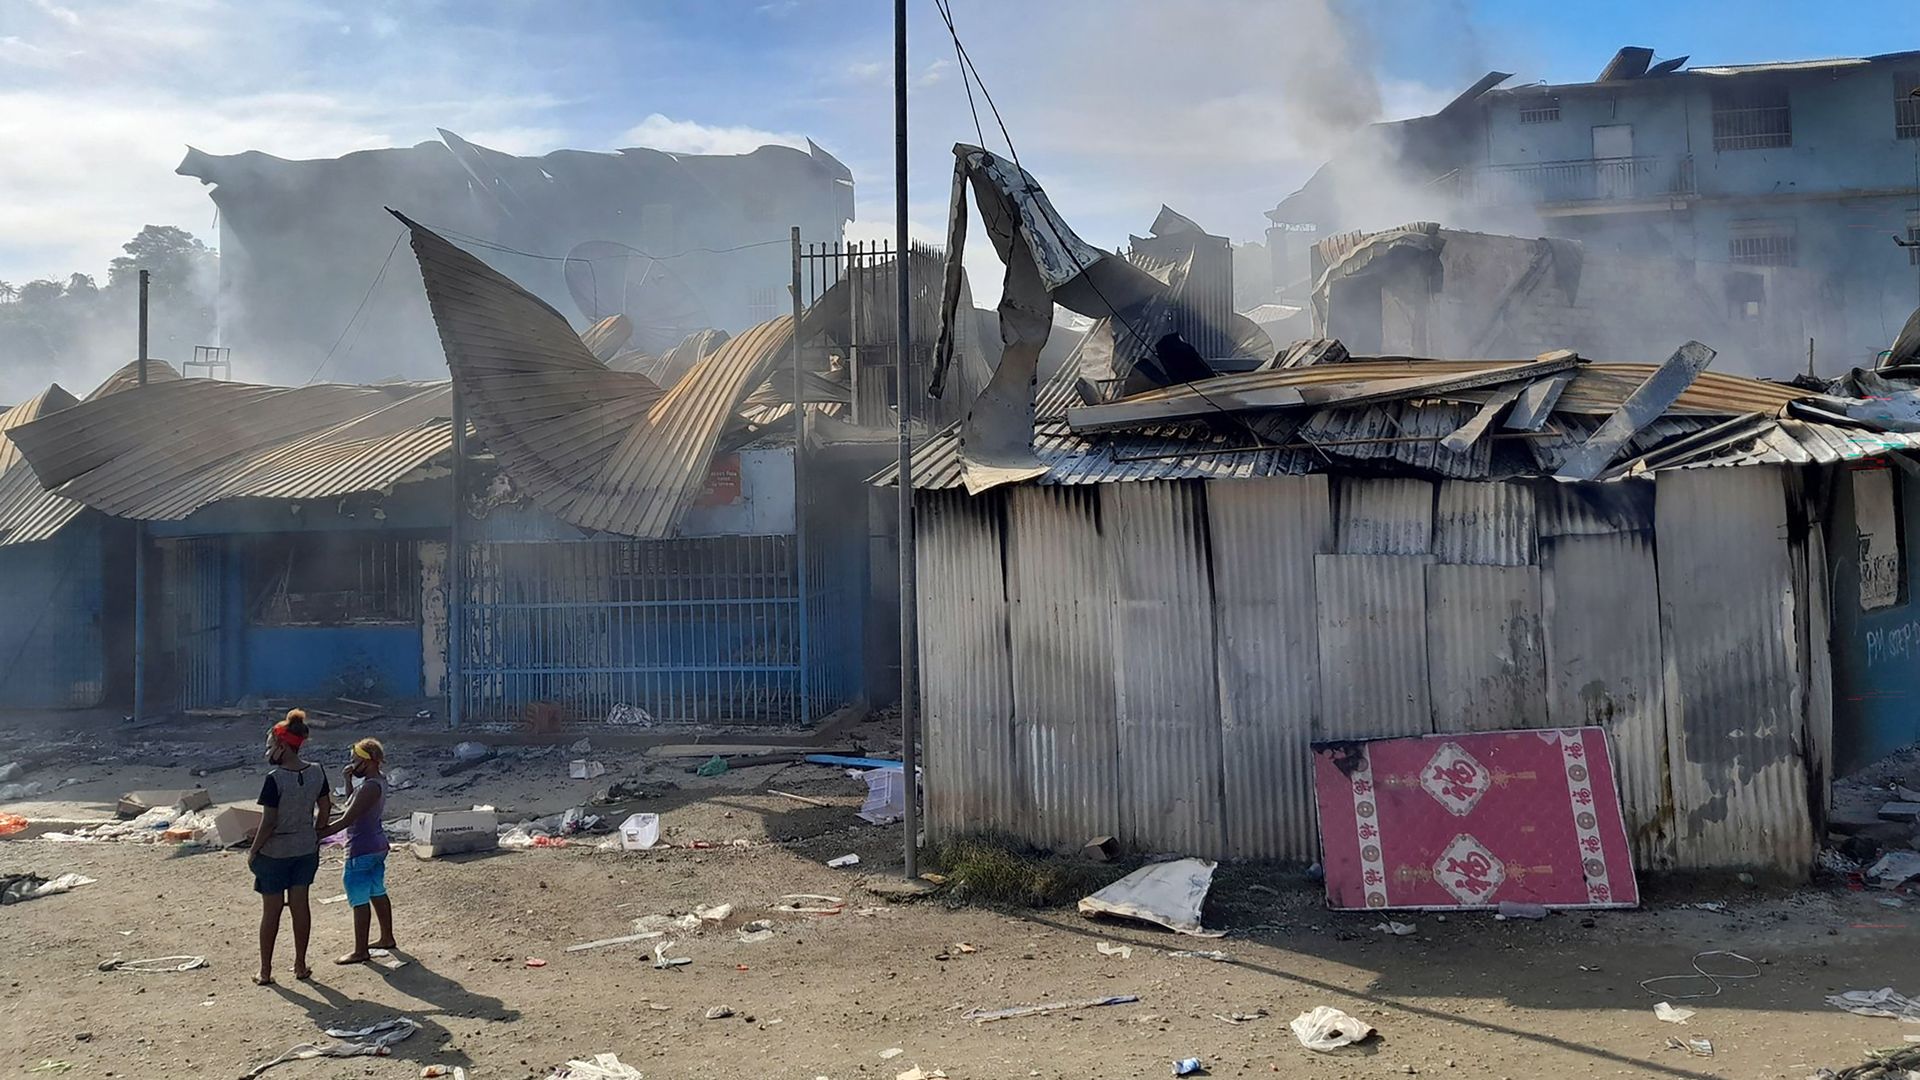  Smoke rises from a burnt out buildings in Honiara's Chinatown on November 26, 2021 after two days of rioting.